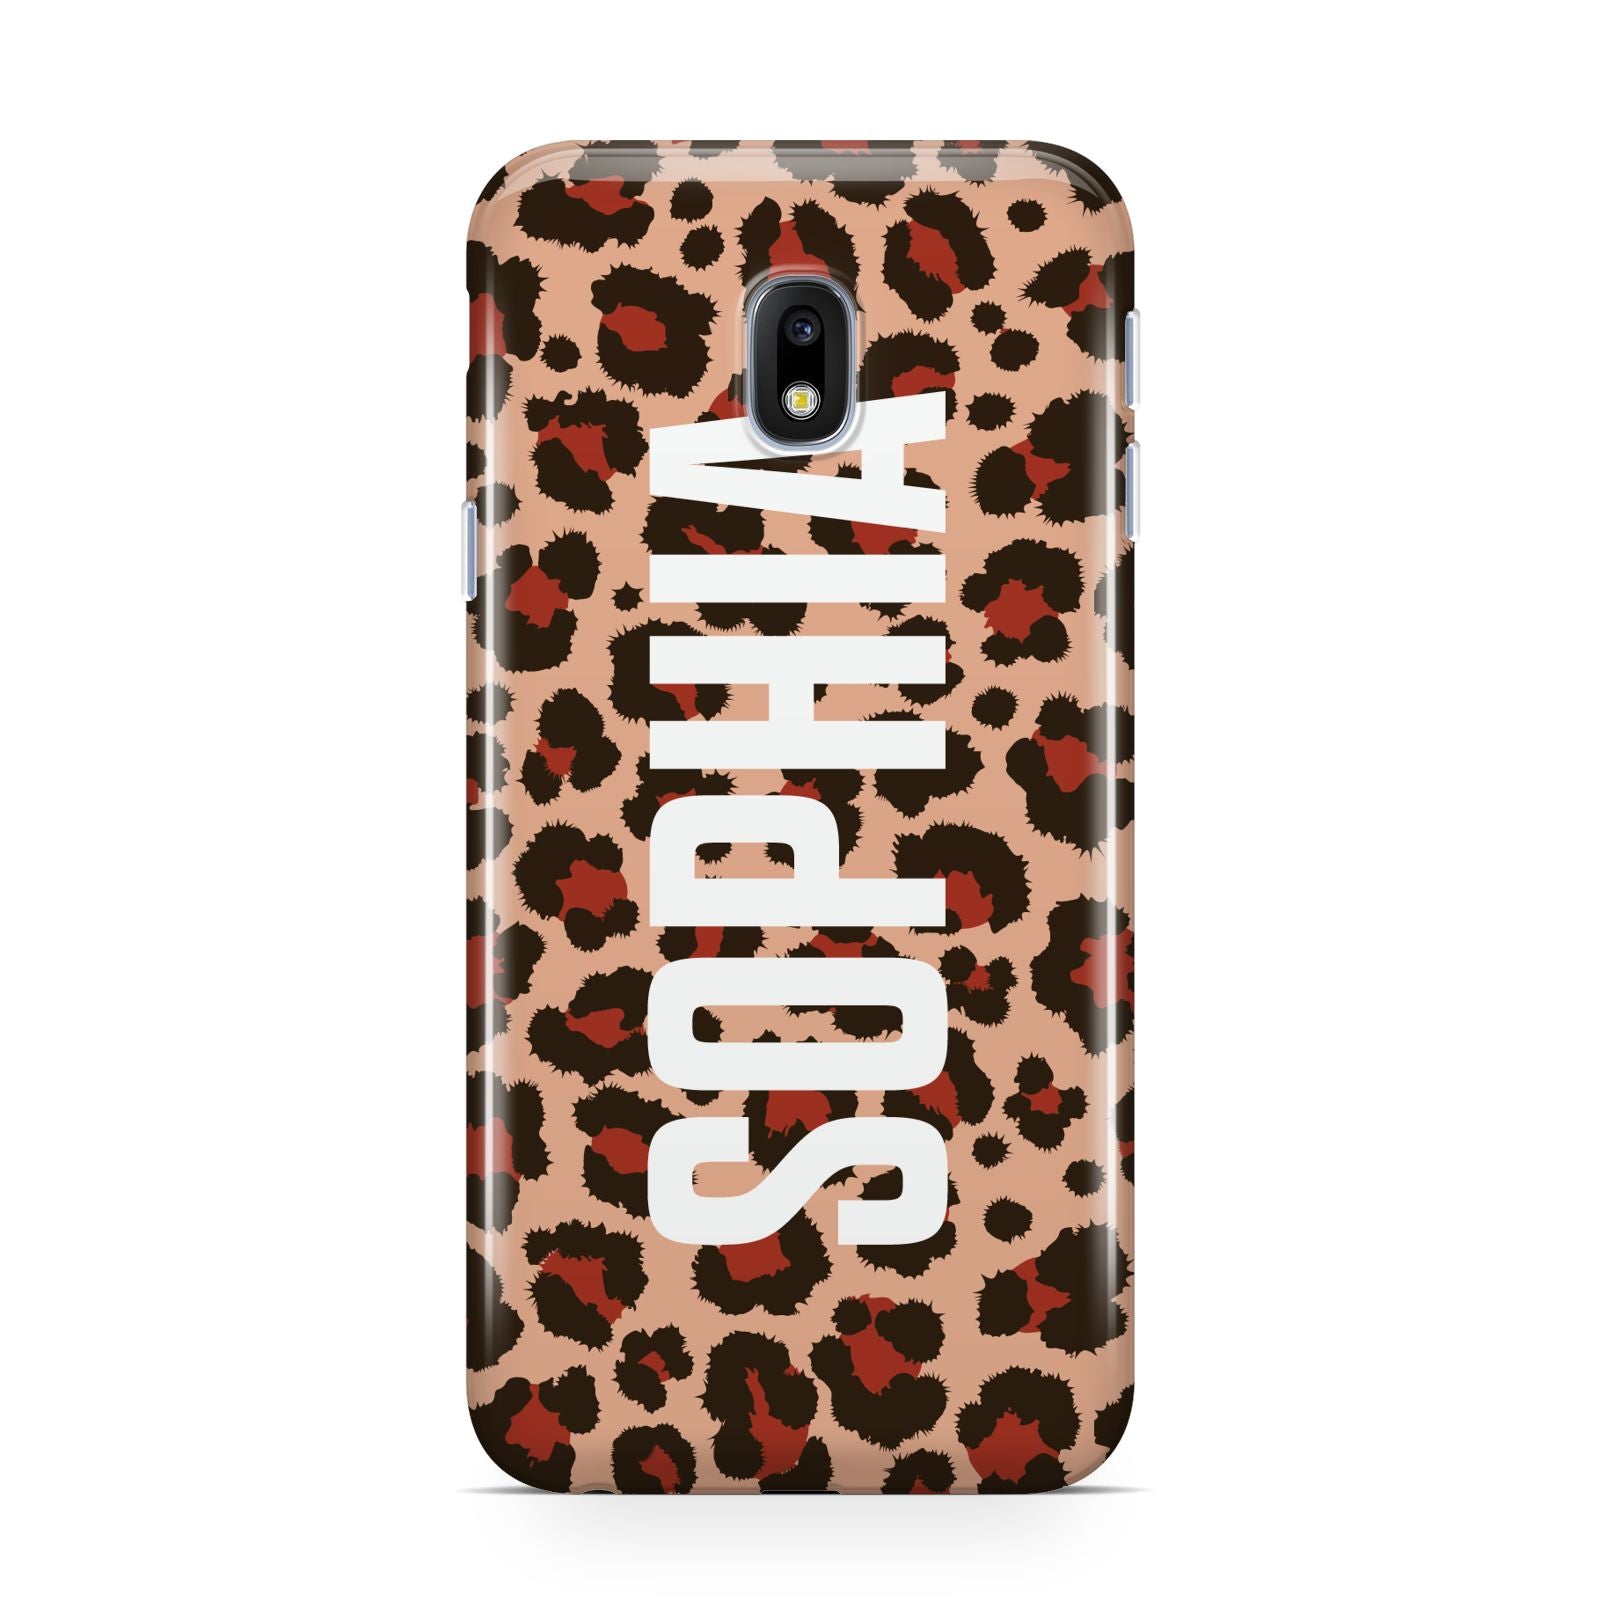 Personalised Leopard Print Name Samsung Galaxy J3 2017 Case